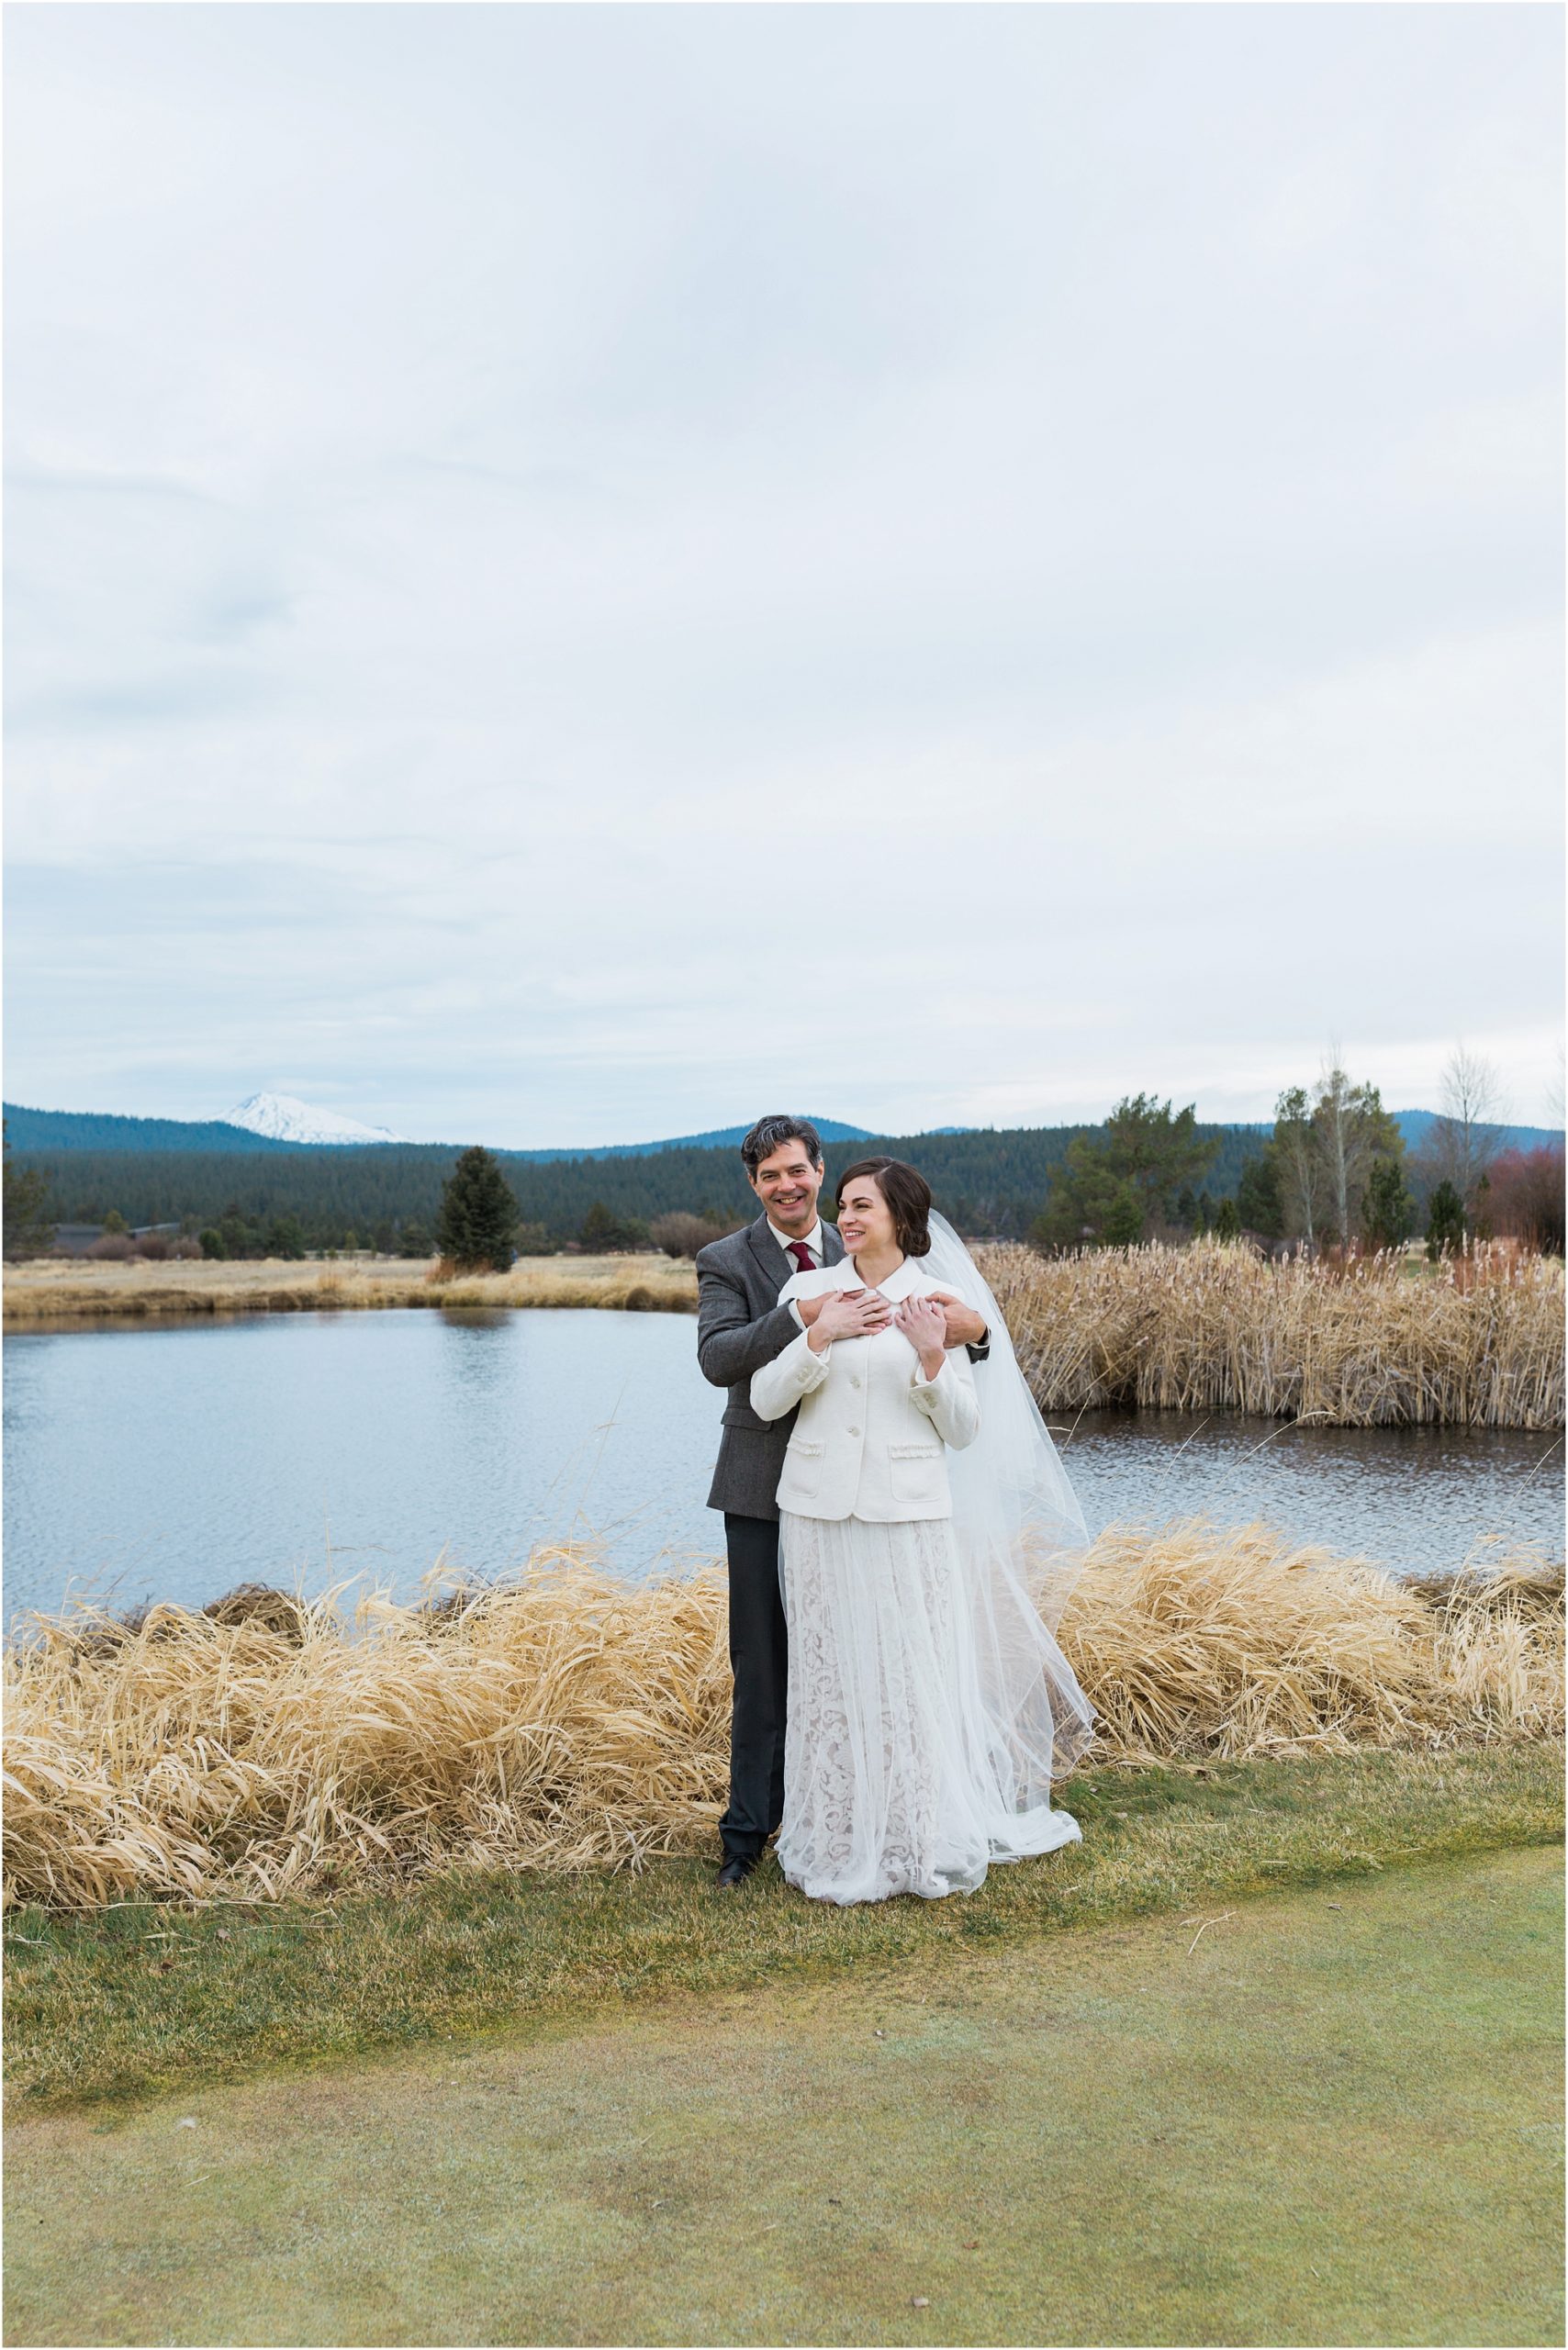 A romantic portrait of the happy couple at their Sunriver Resort winter wedding in Oregon. | Erica Swantek Photography